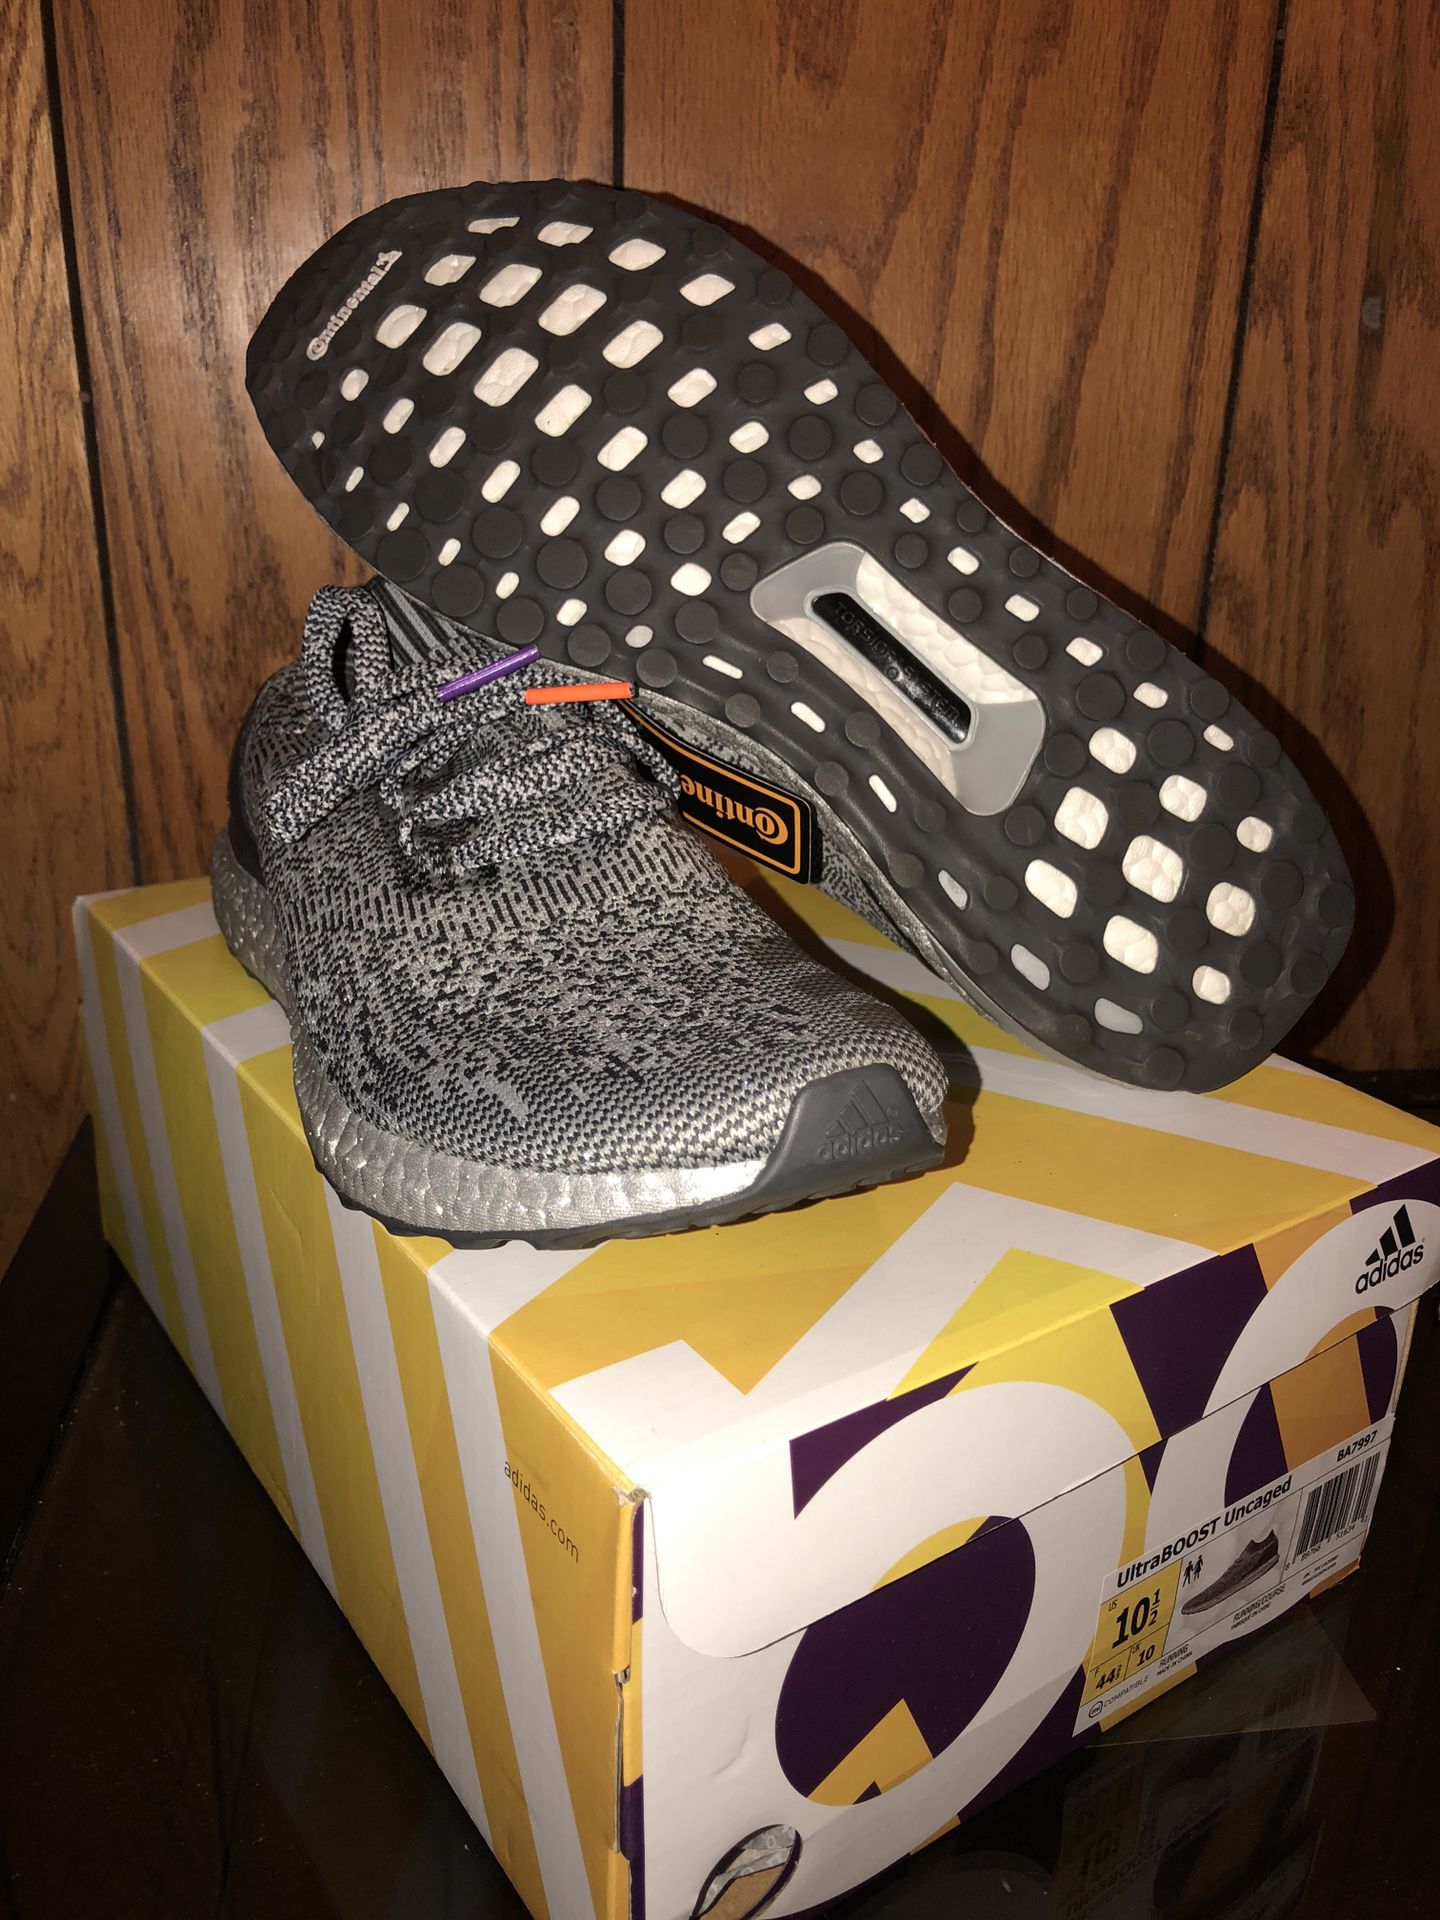 Adidas ultraboost uncaged size 10.5 brand new